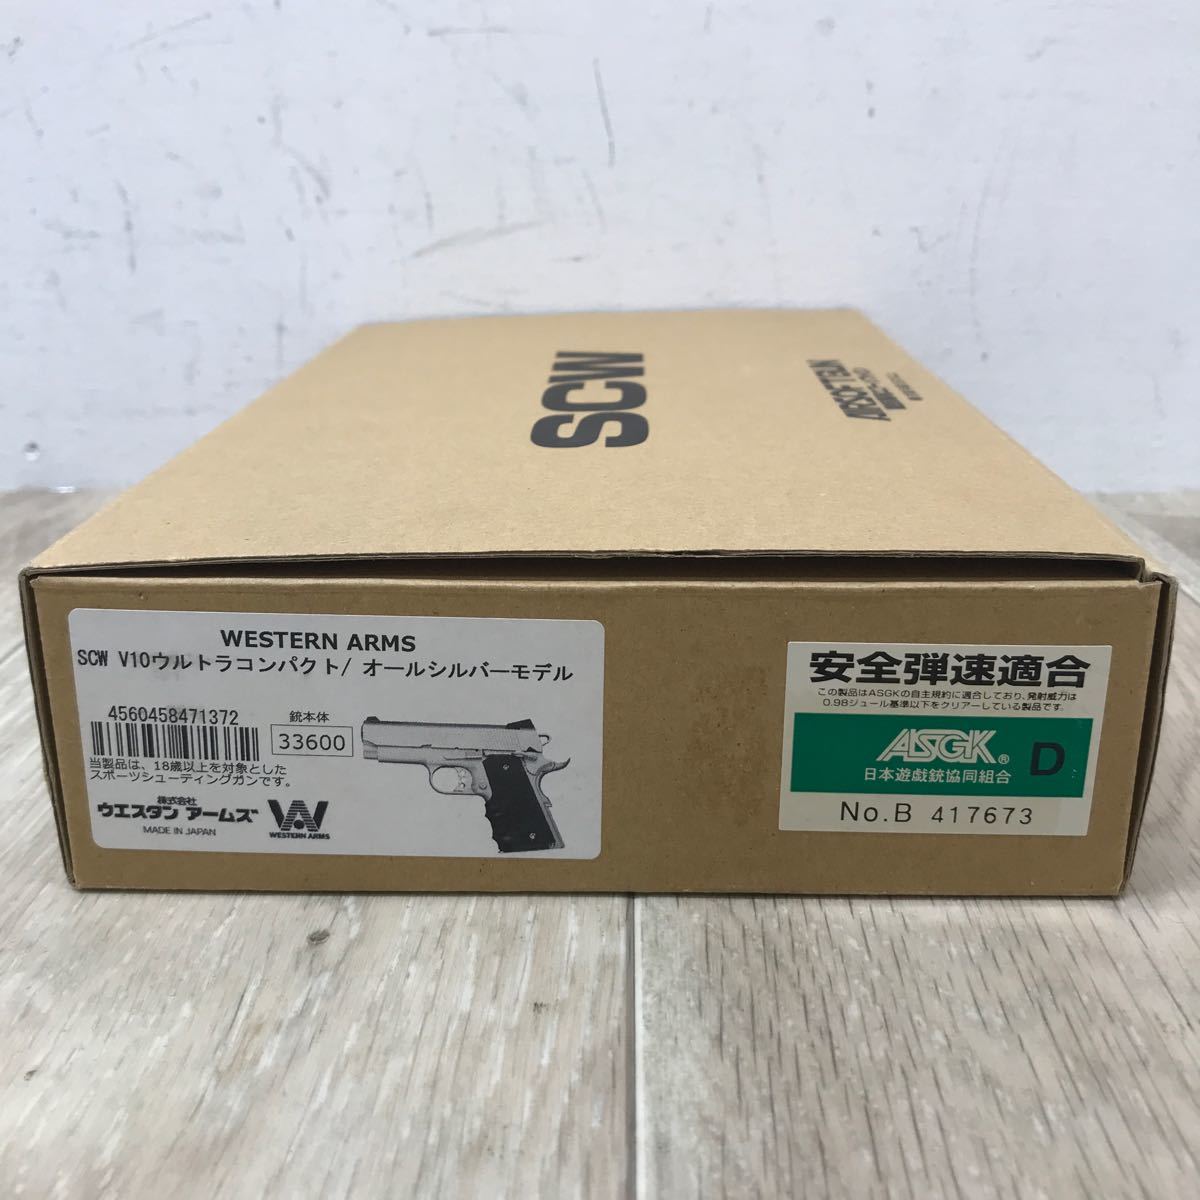 123 D military / Western arm zV10 Ultra compact all silver gas blowback gas bro hand gun [18 -years old and more only 